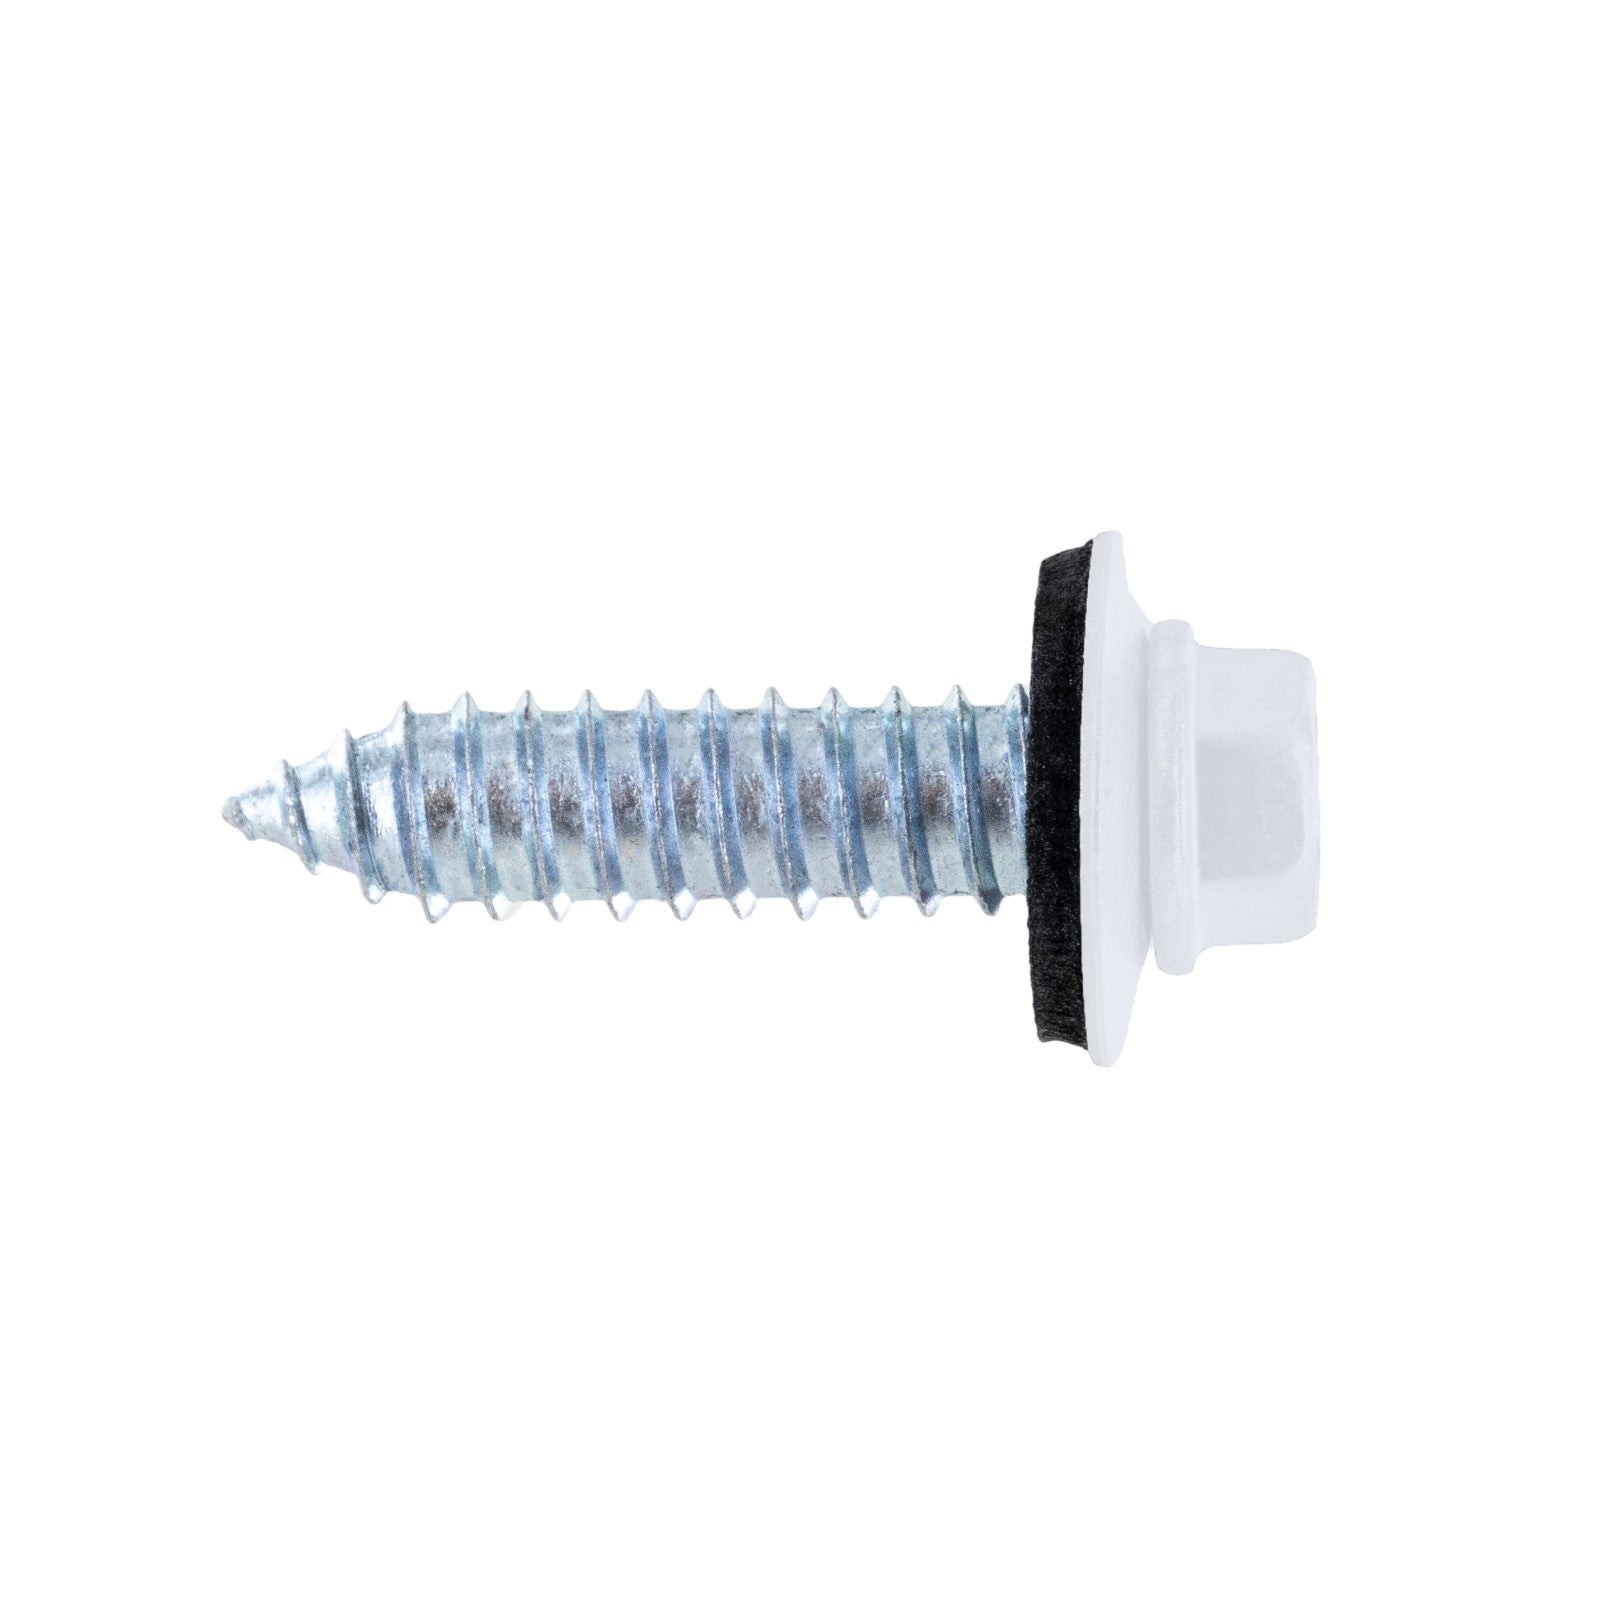 #17 x 1" Tapping Steelbinder Metal Roofing Screw - Bright White - Pkg 250